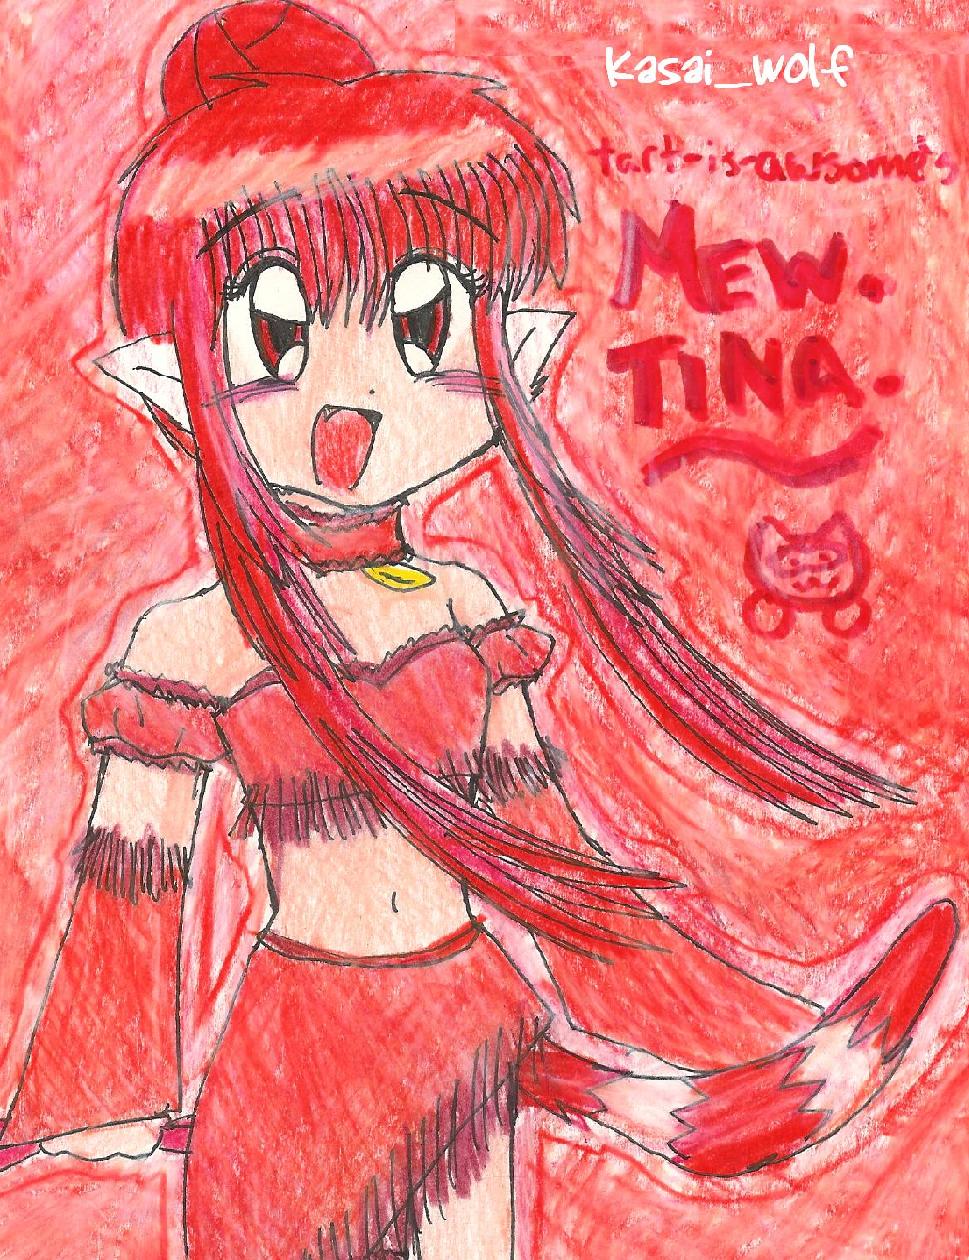 Mew Tina*request* by kasai_wolf